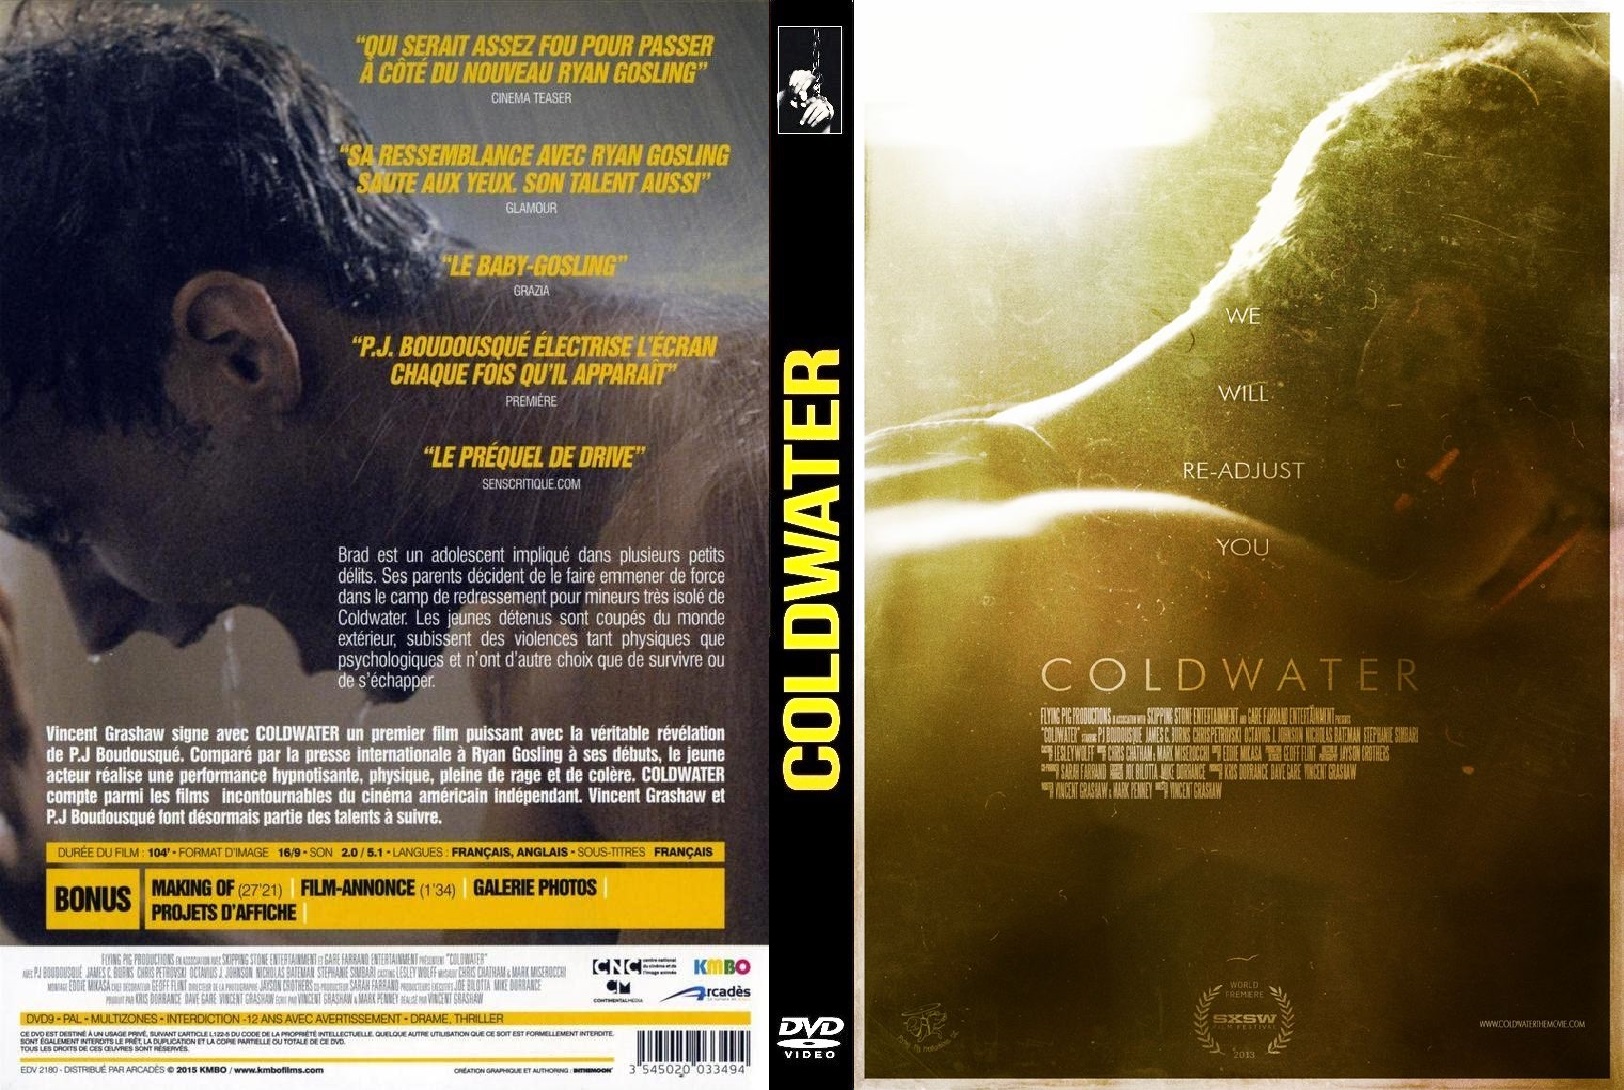 Jaquette DVD Coldwater custom